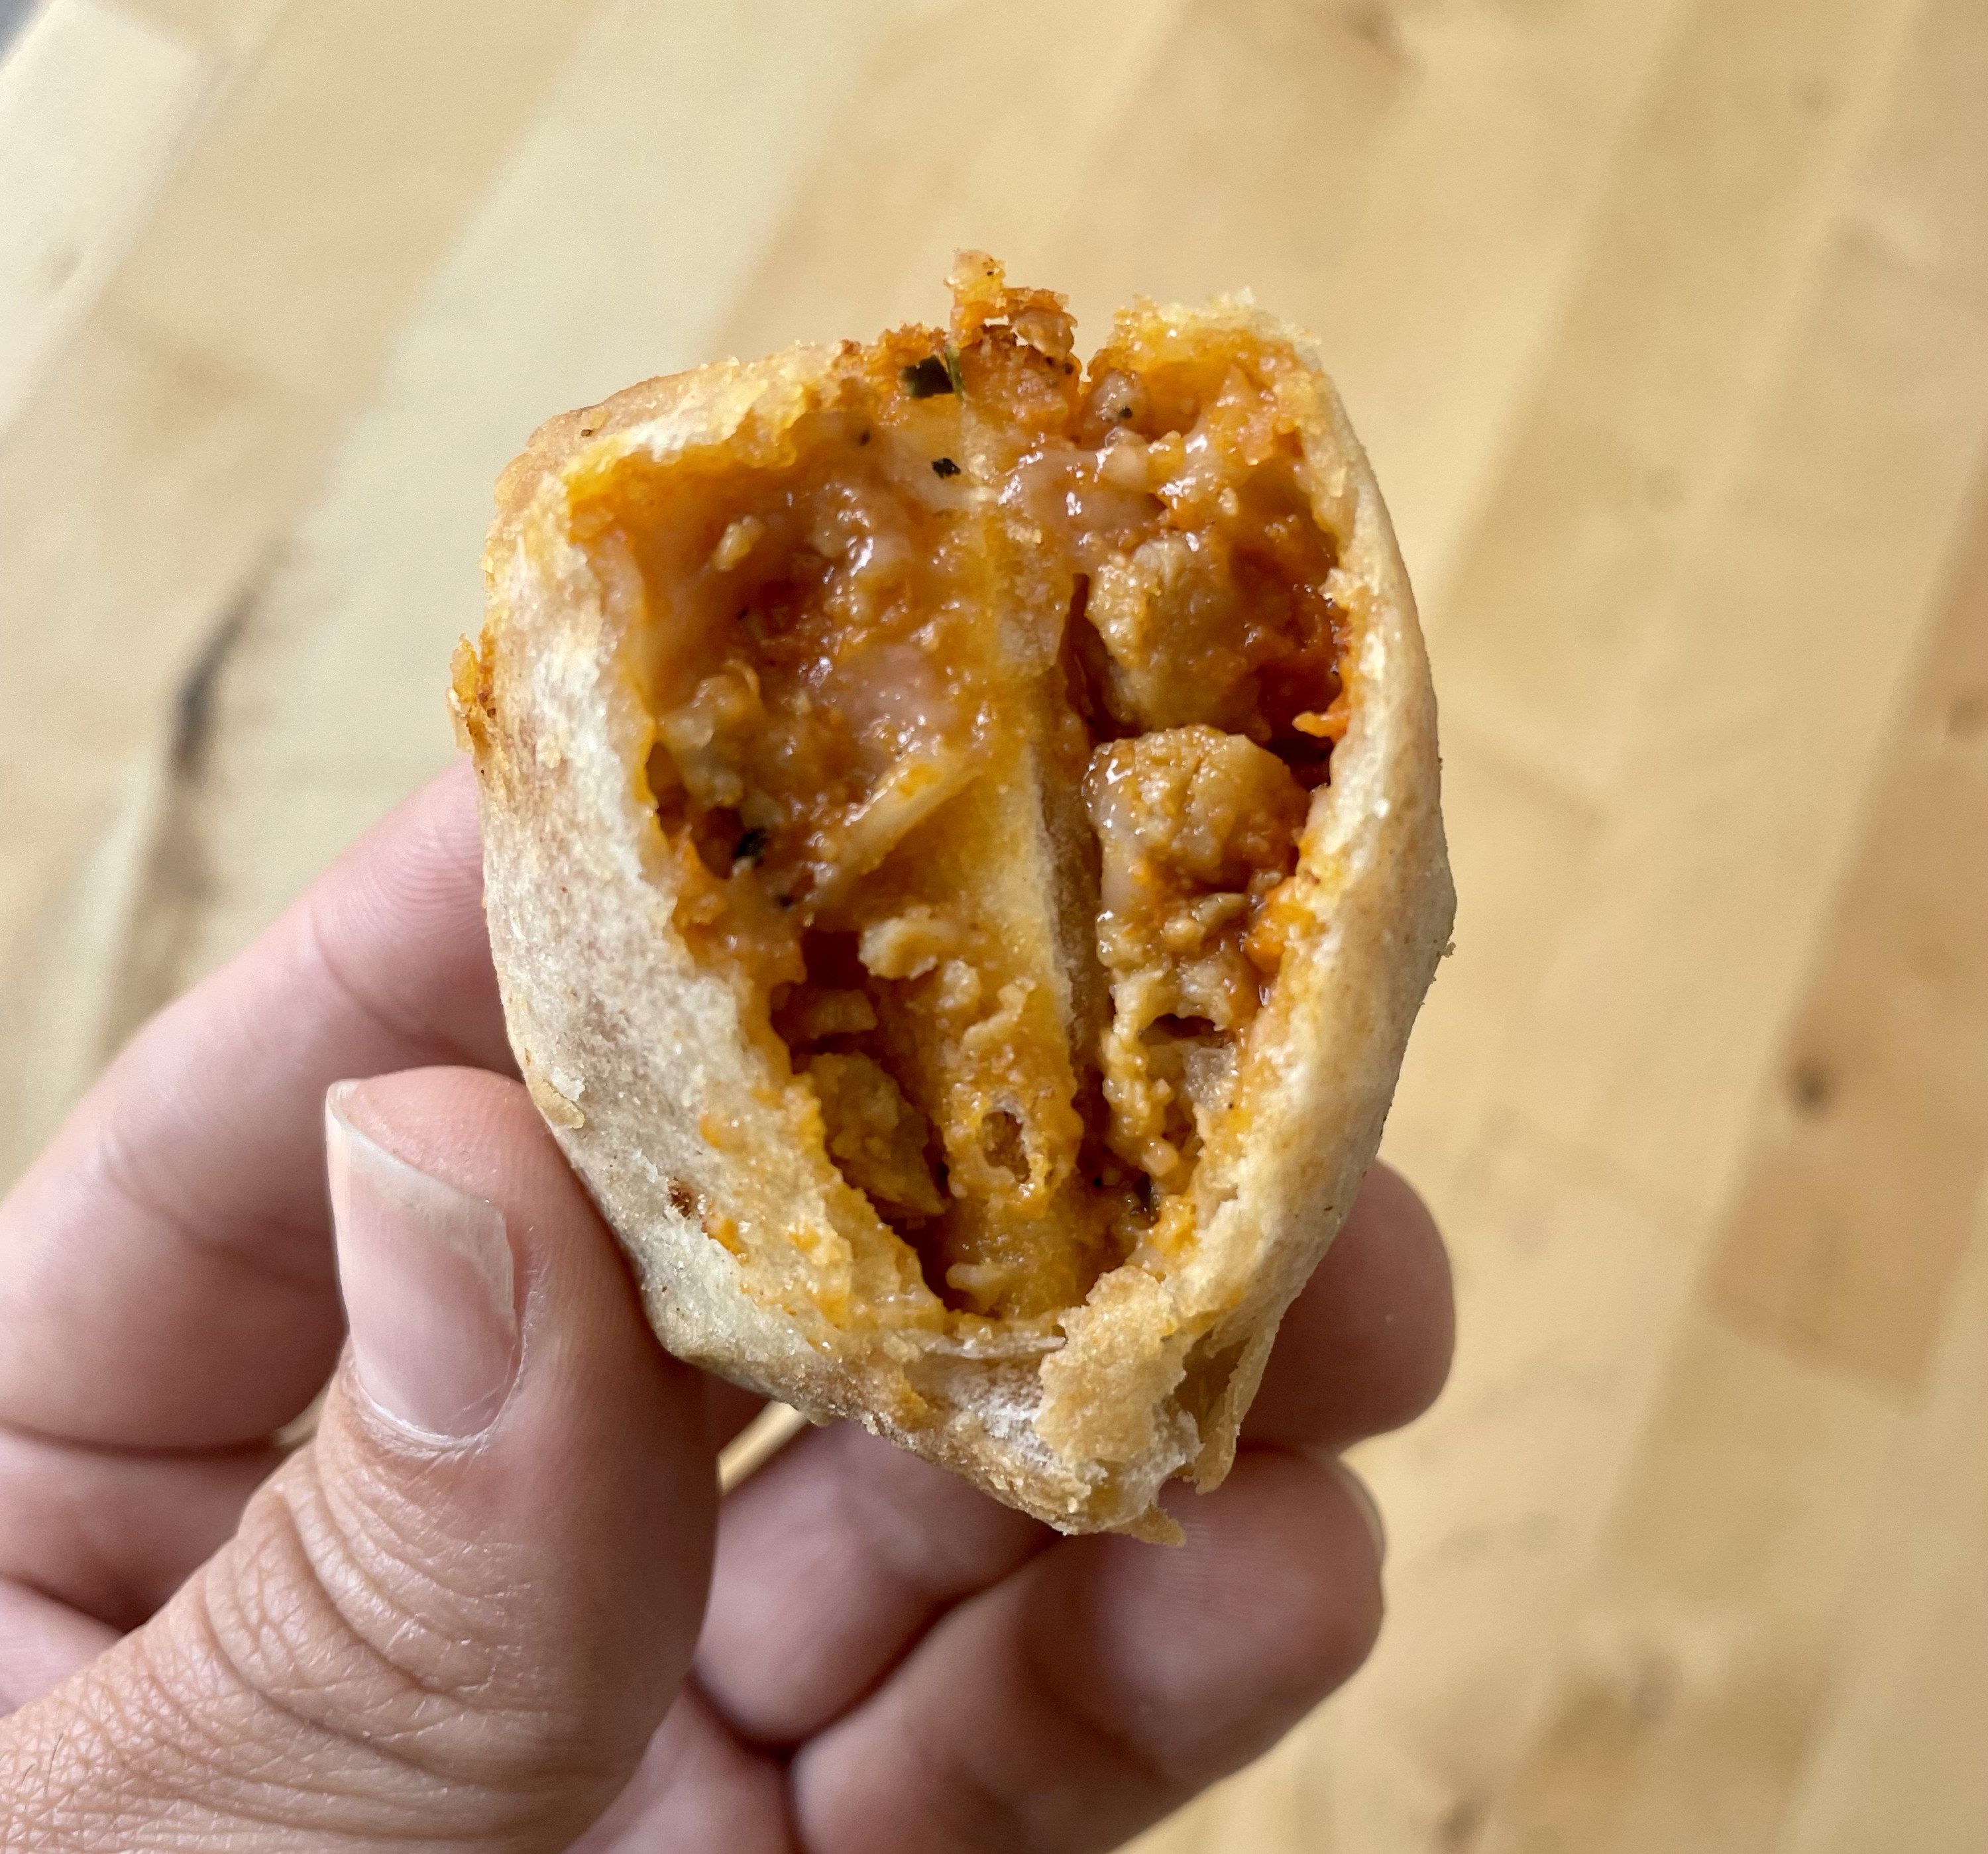 The inside of the pizza sausage empanada